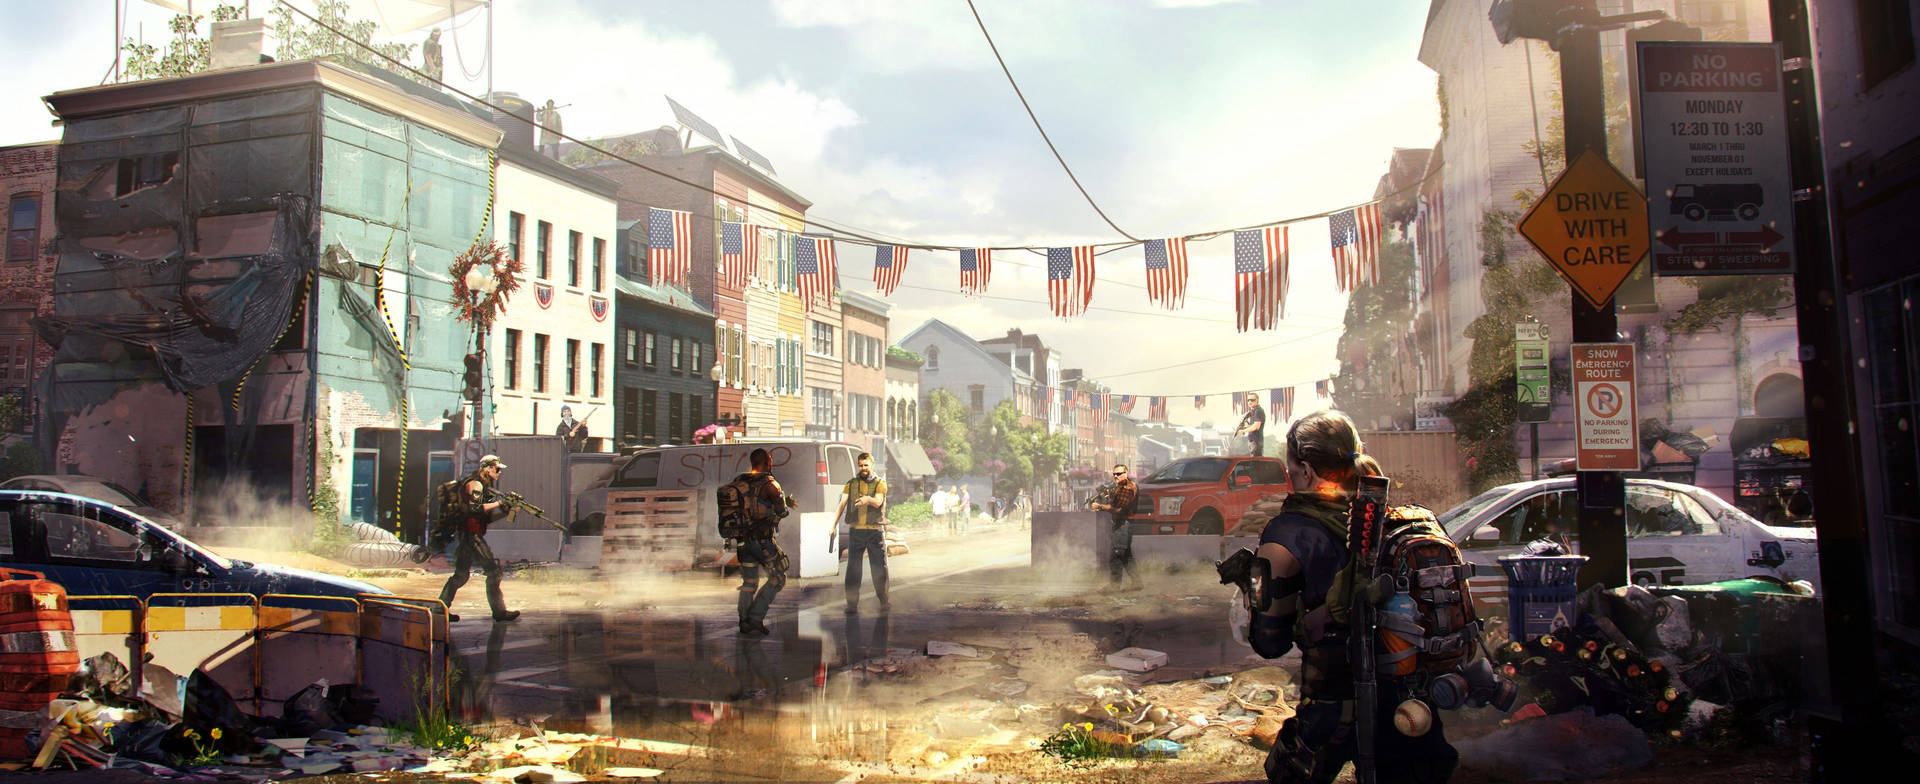 Collect Resources in Washington DC with The Division 2 Wallpaper